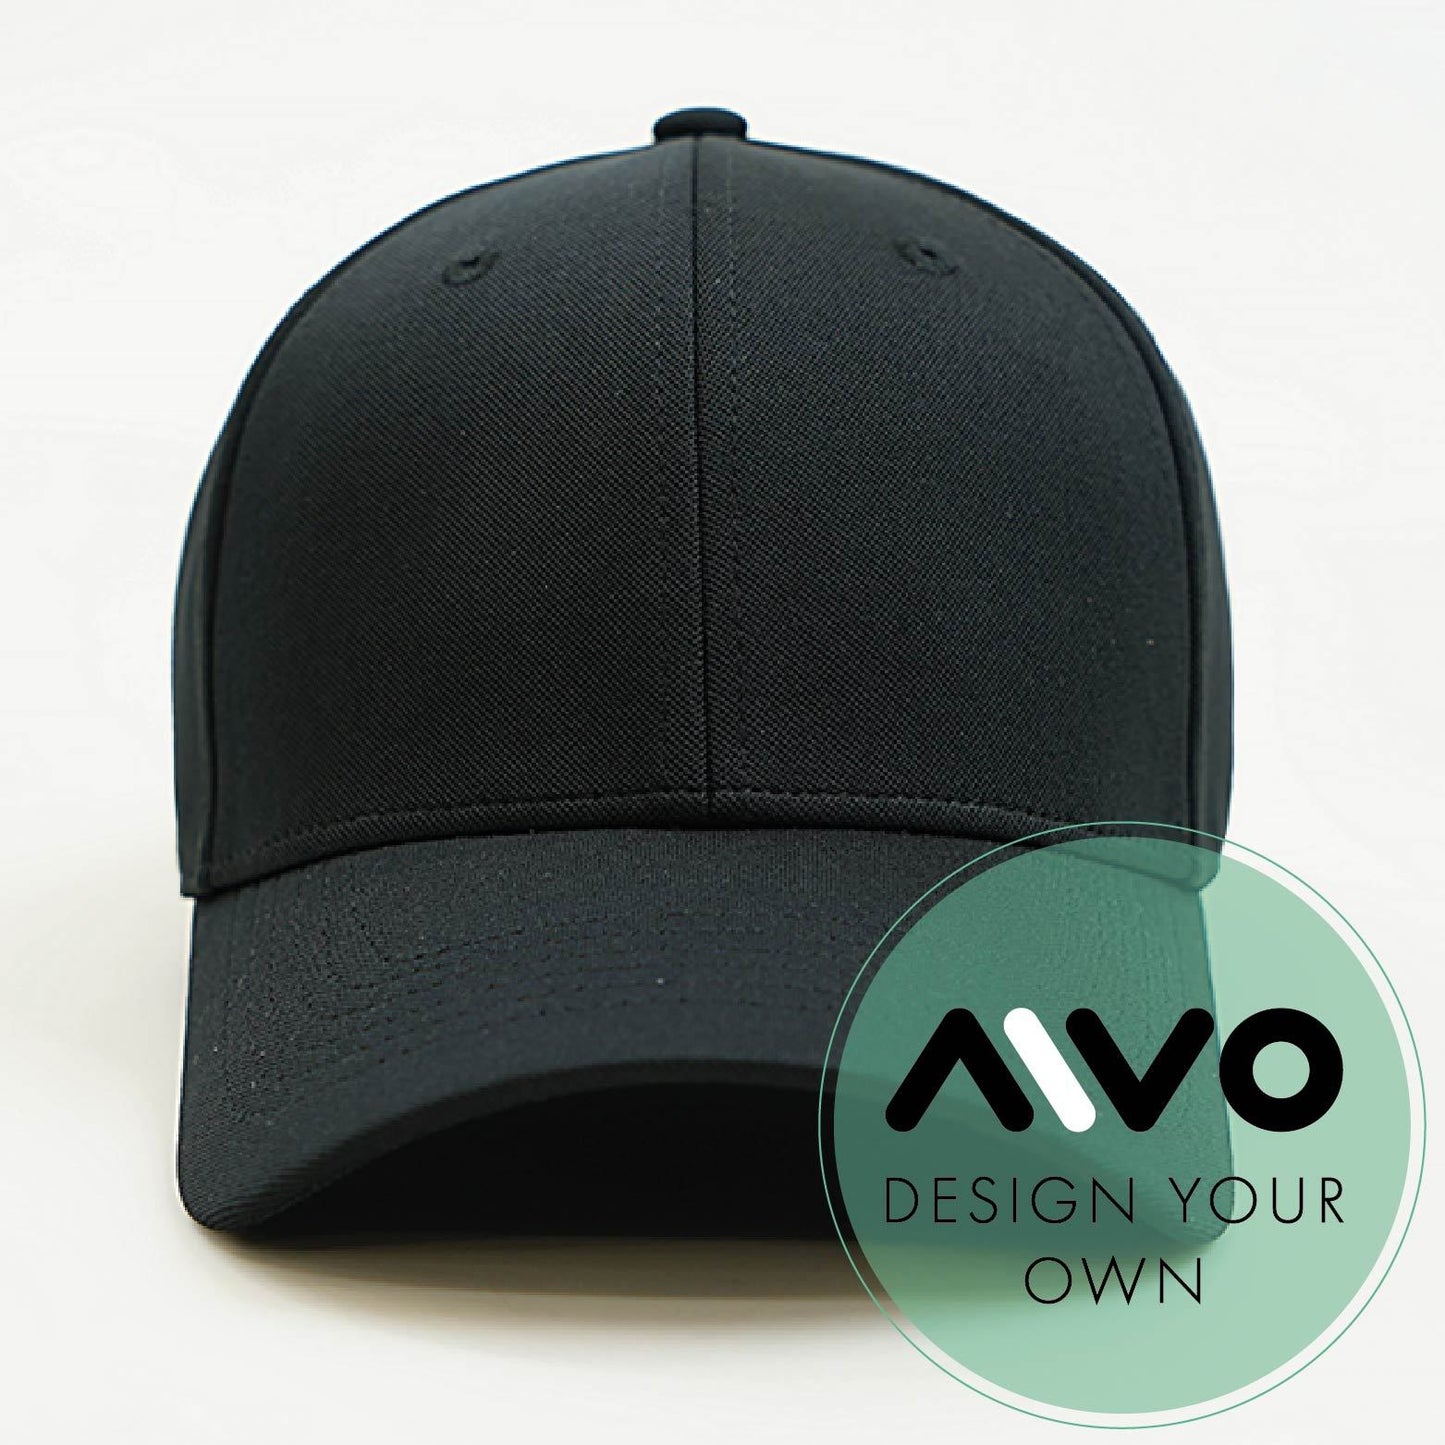 Performance Cap design your own and add your own logo - in black